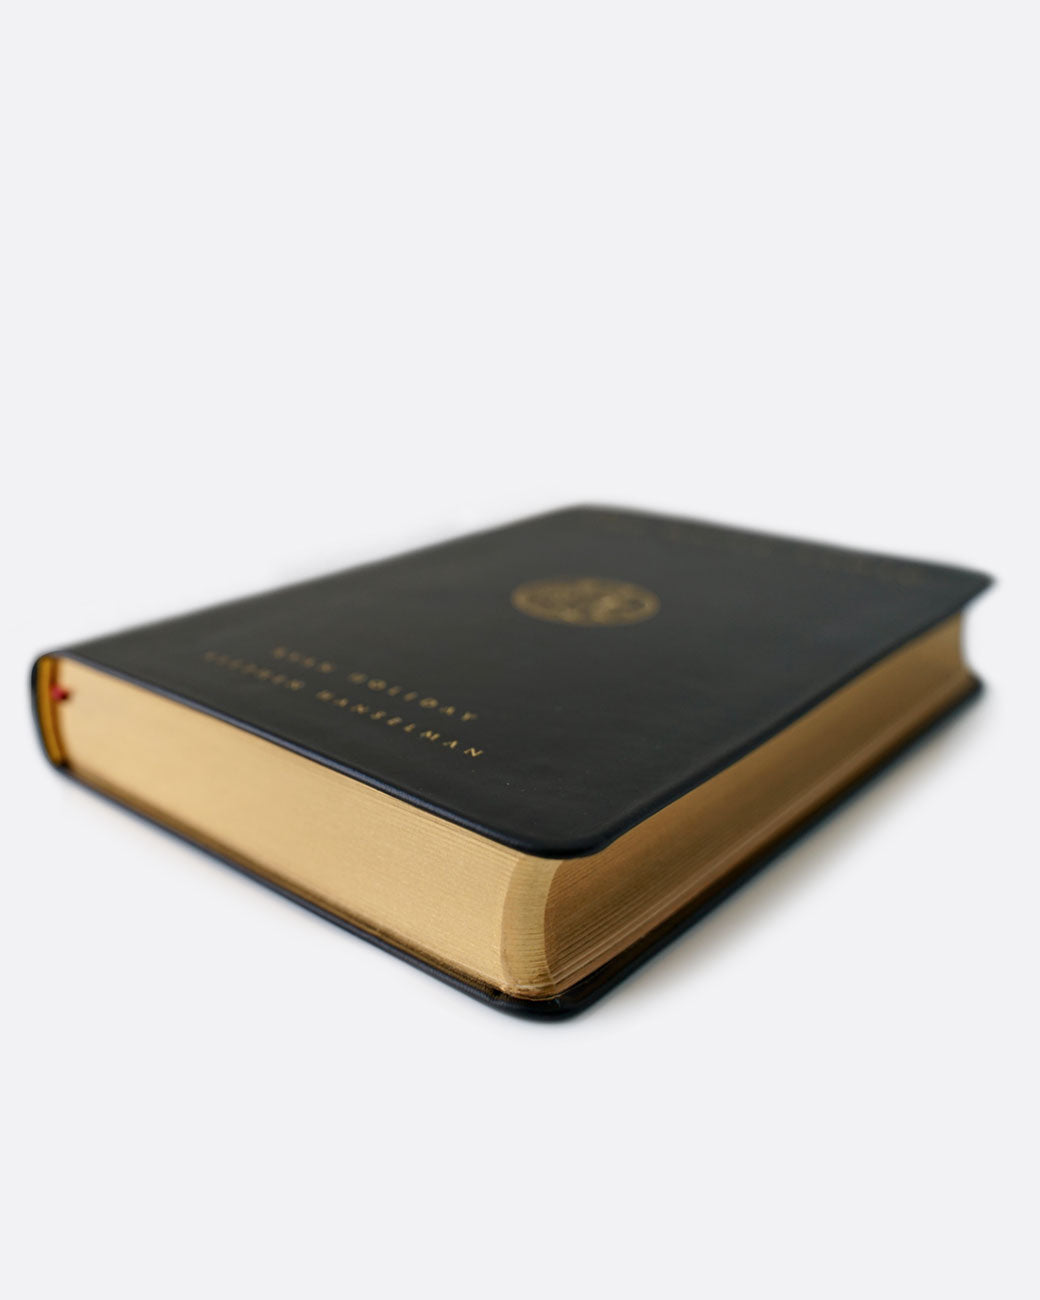 Side view of Daily Stoic book